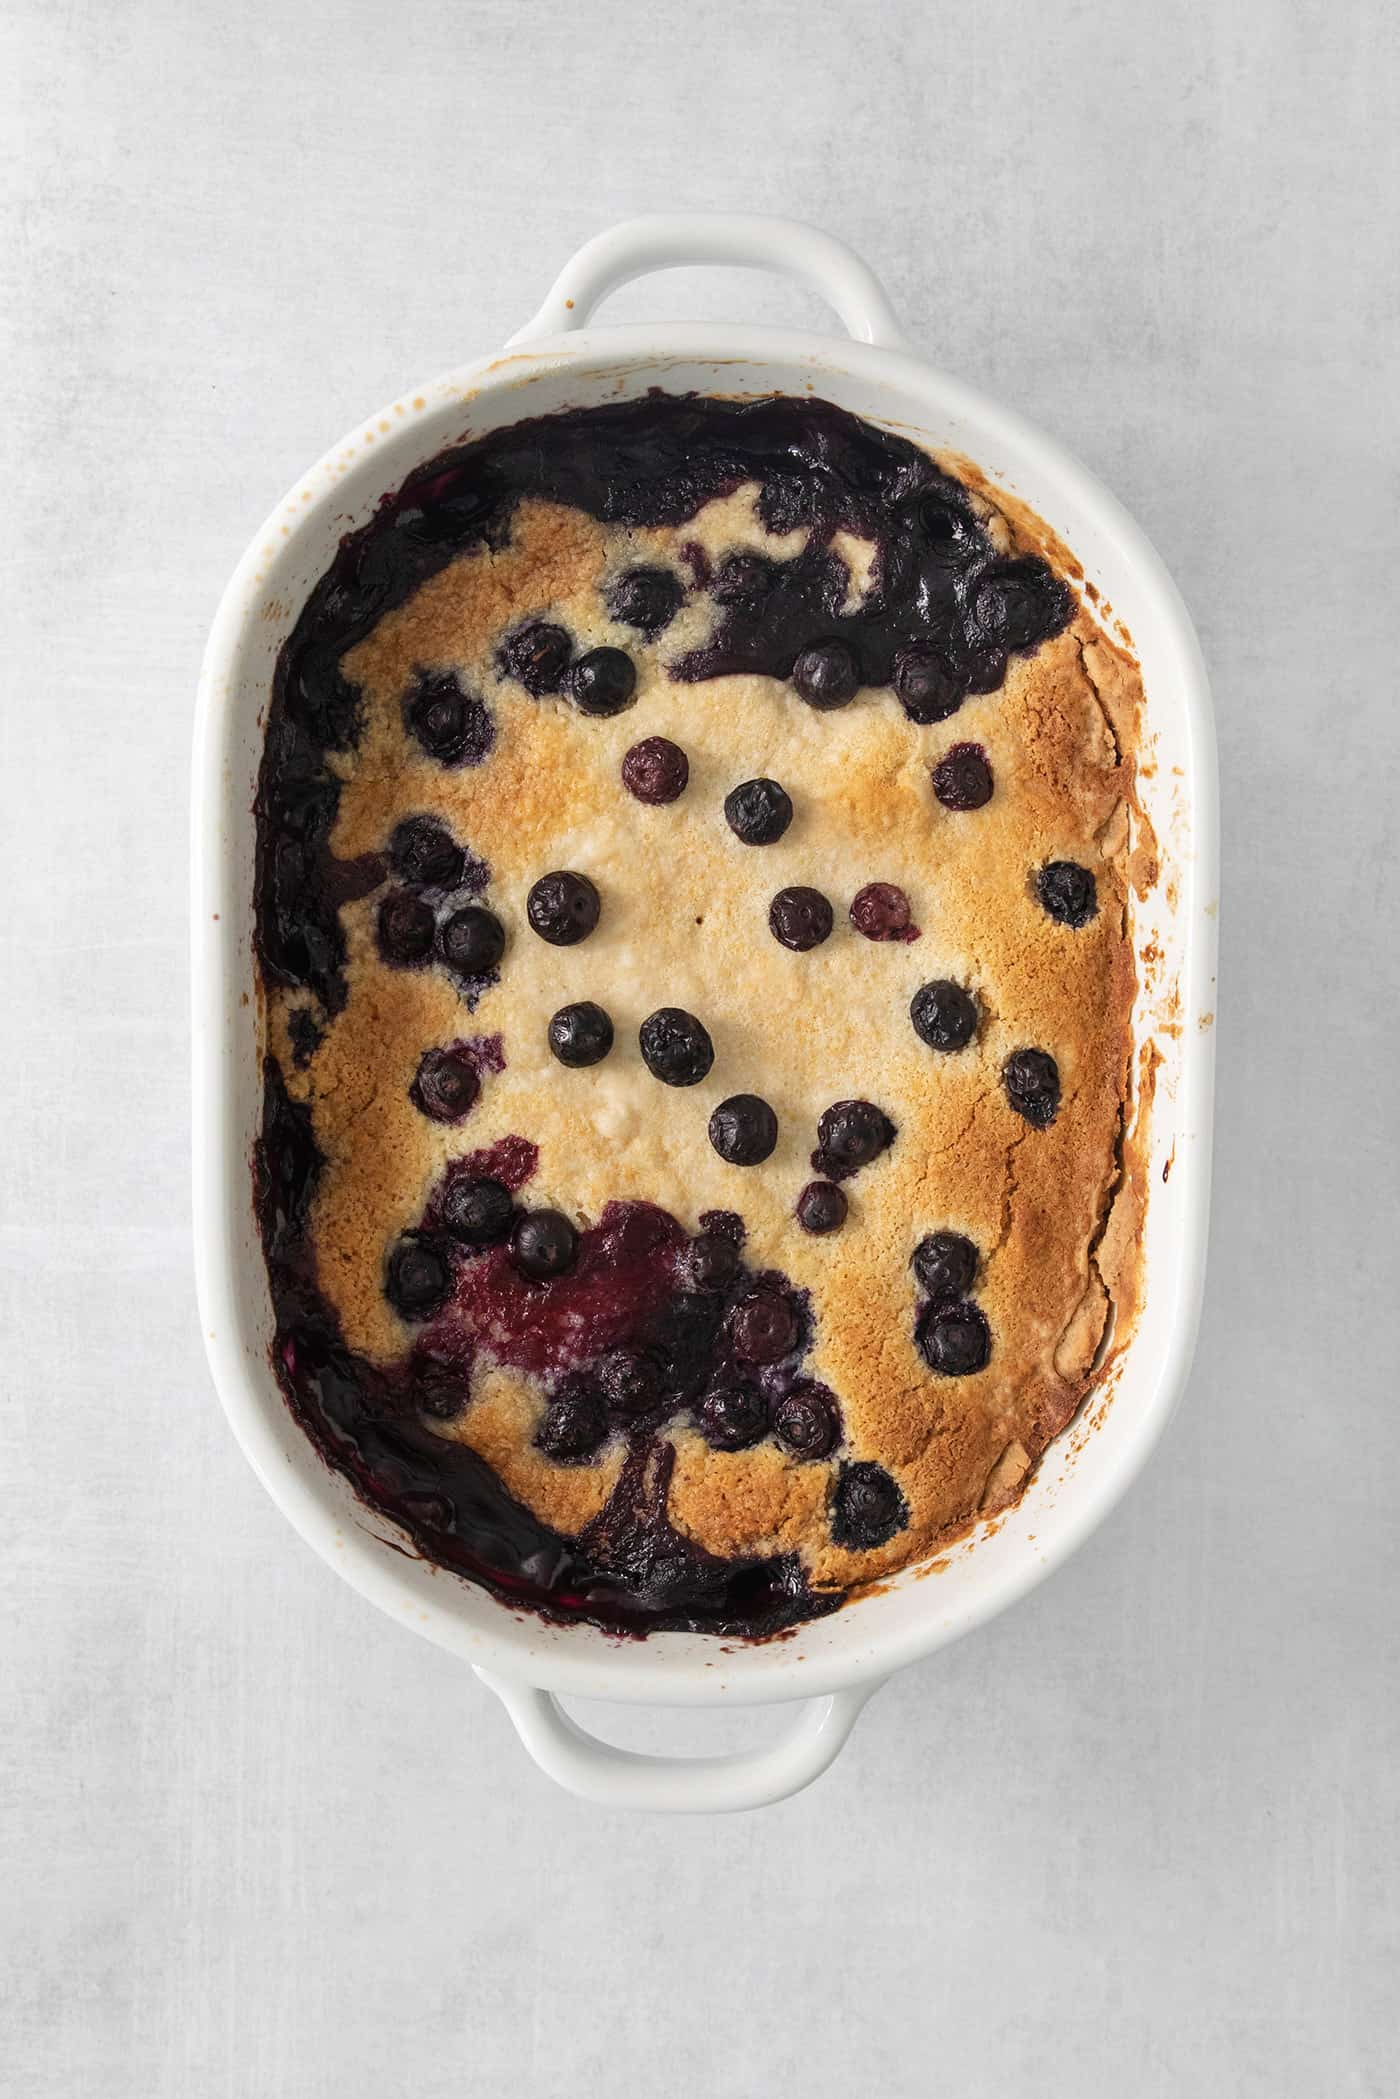 Blueberry dump cake in a white baking dish.